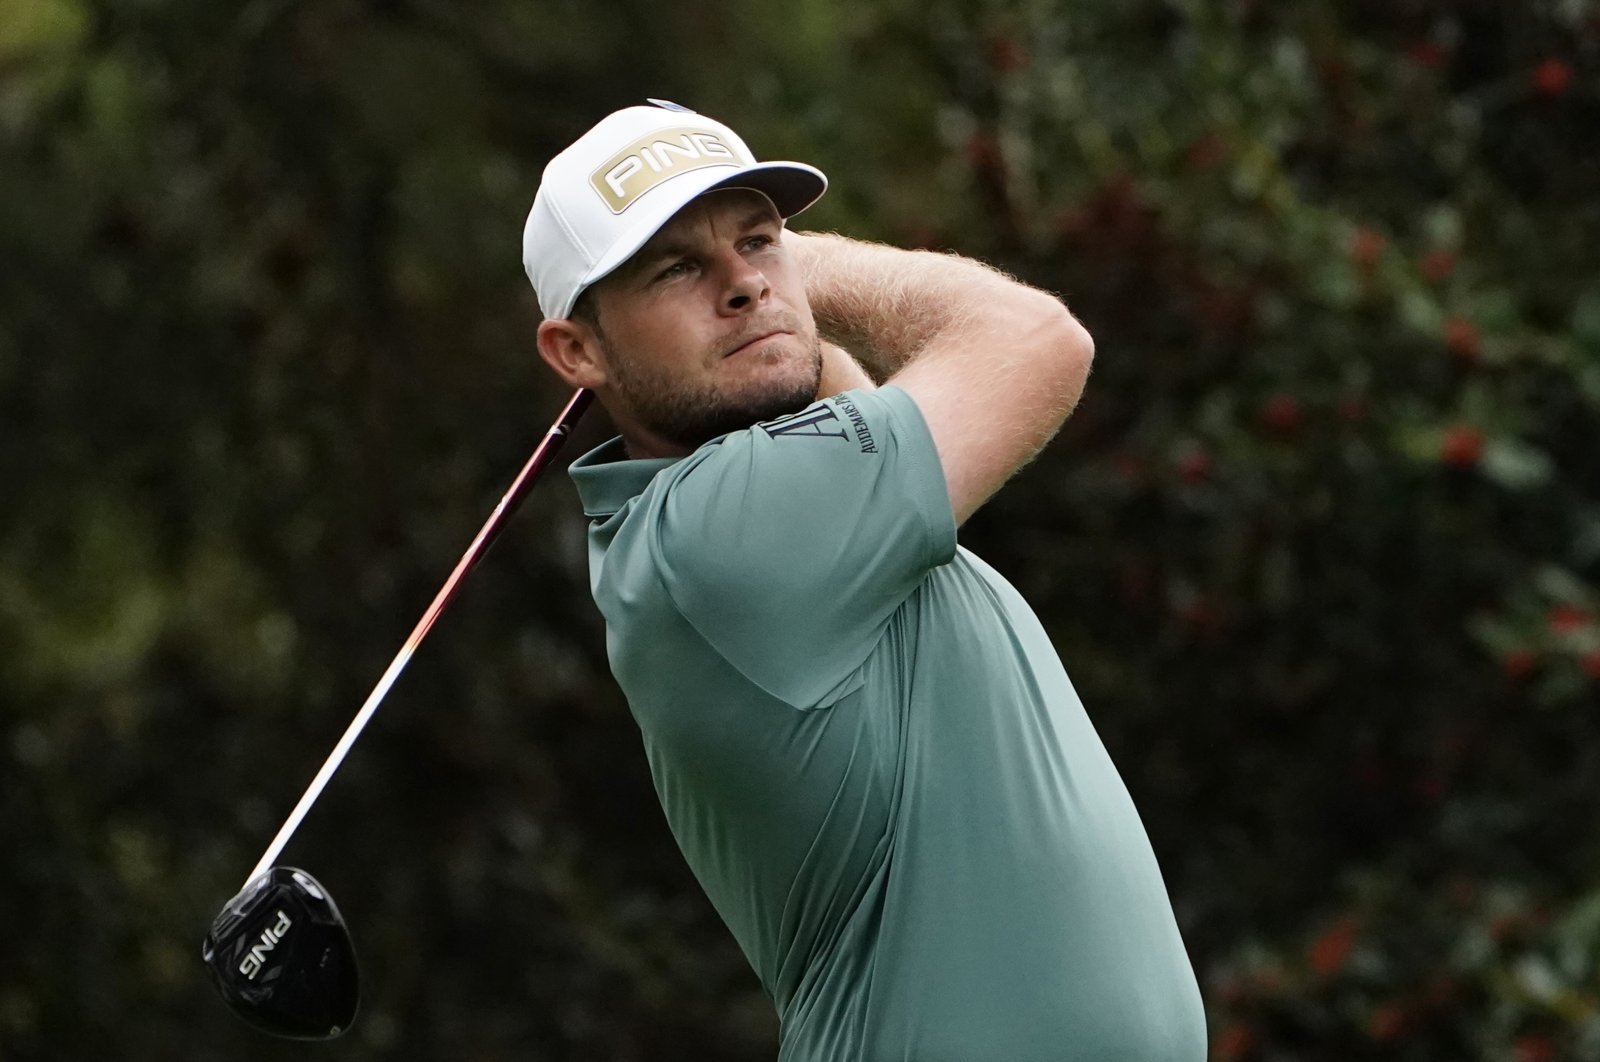 England's Tyrrell Hatton overcame Rory McIlroy's one-shot advantage and a double lead to win the Abu Dhabi Championship final in Abu Dhabi, the United Arab Emirates (UAE), Jan. 24, 2021.